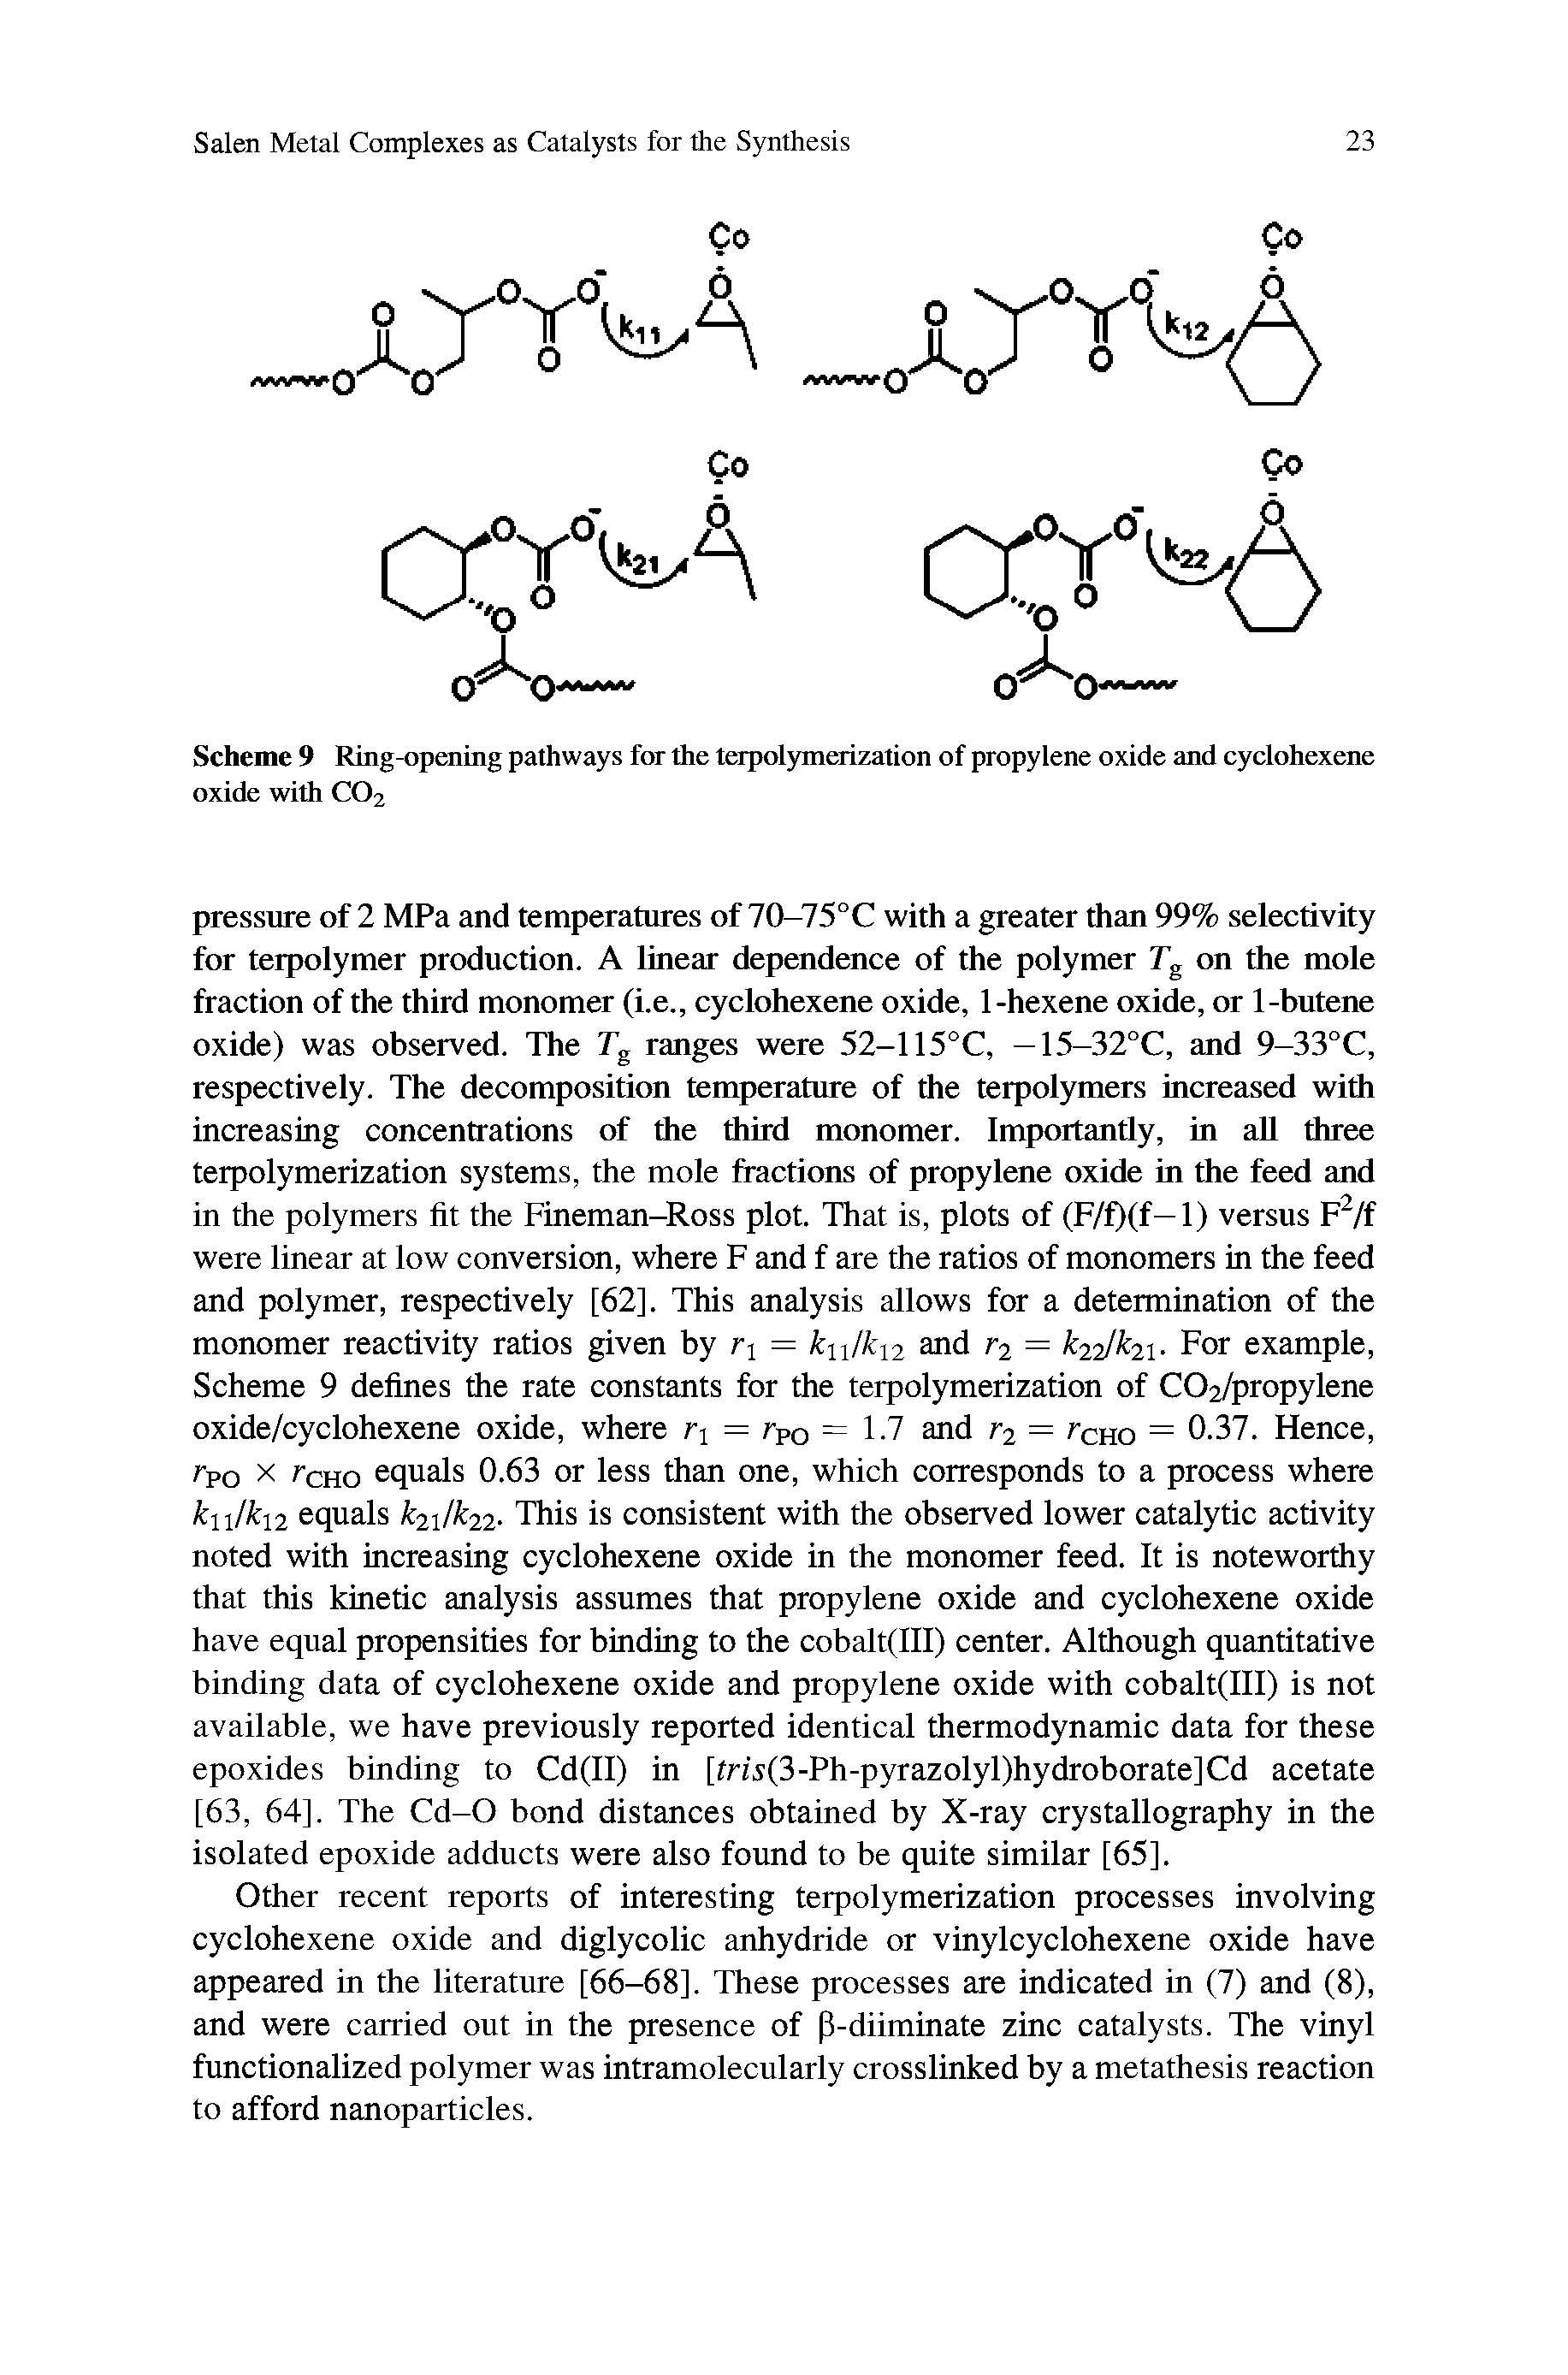 Scheme 9 Ring-opening pathways for the terpolymerization of propylene oxide and cyclohexene oxide with CO2...